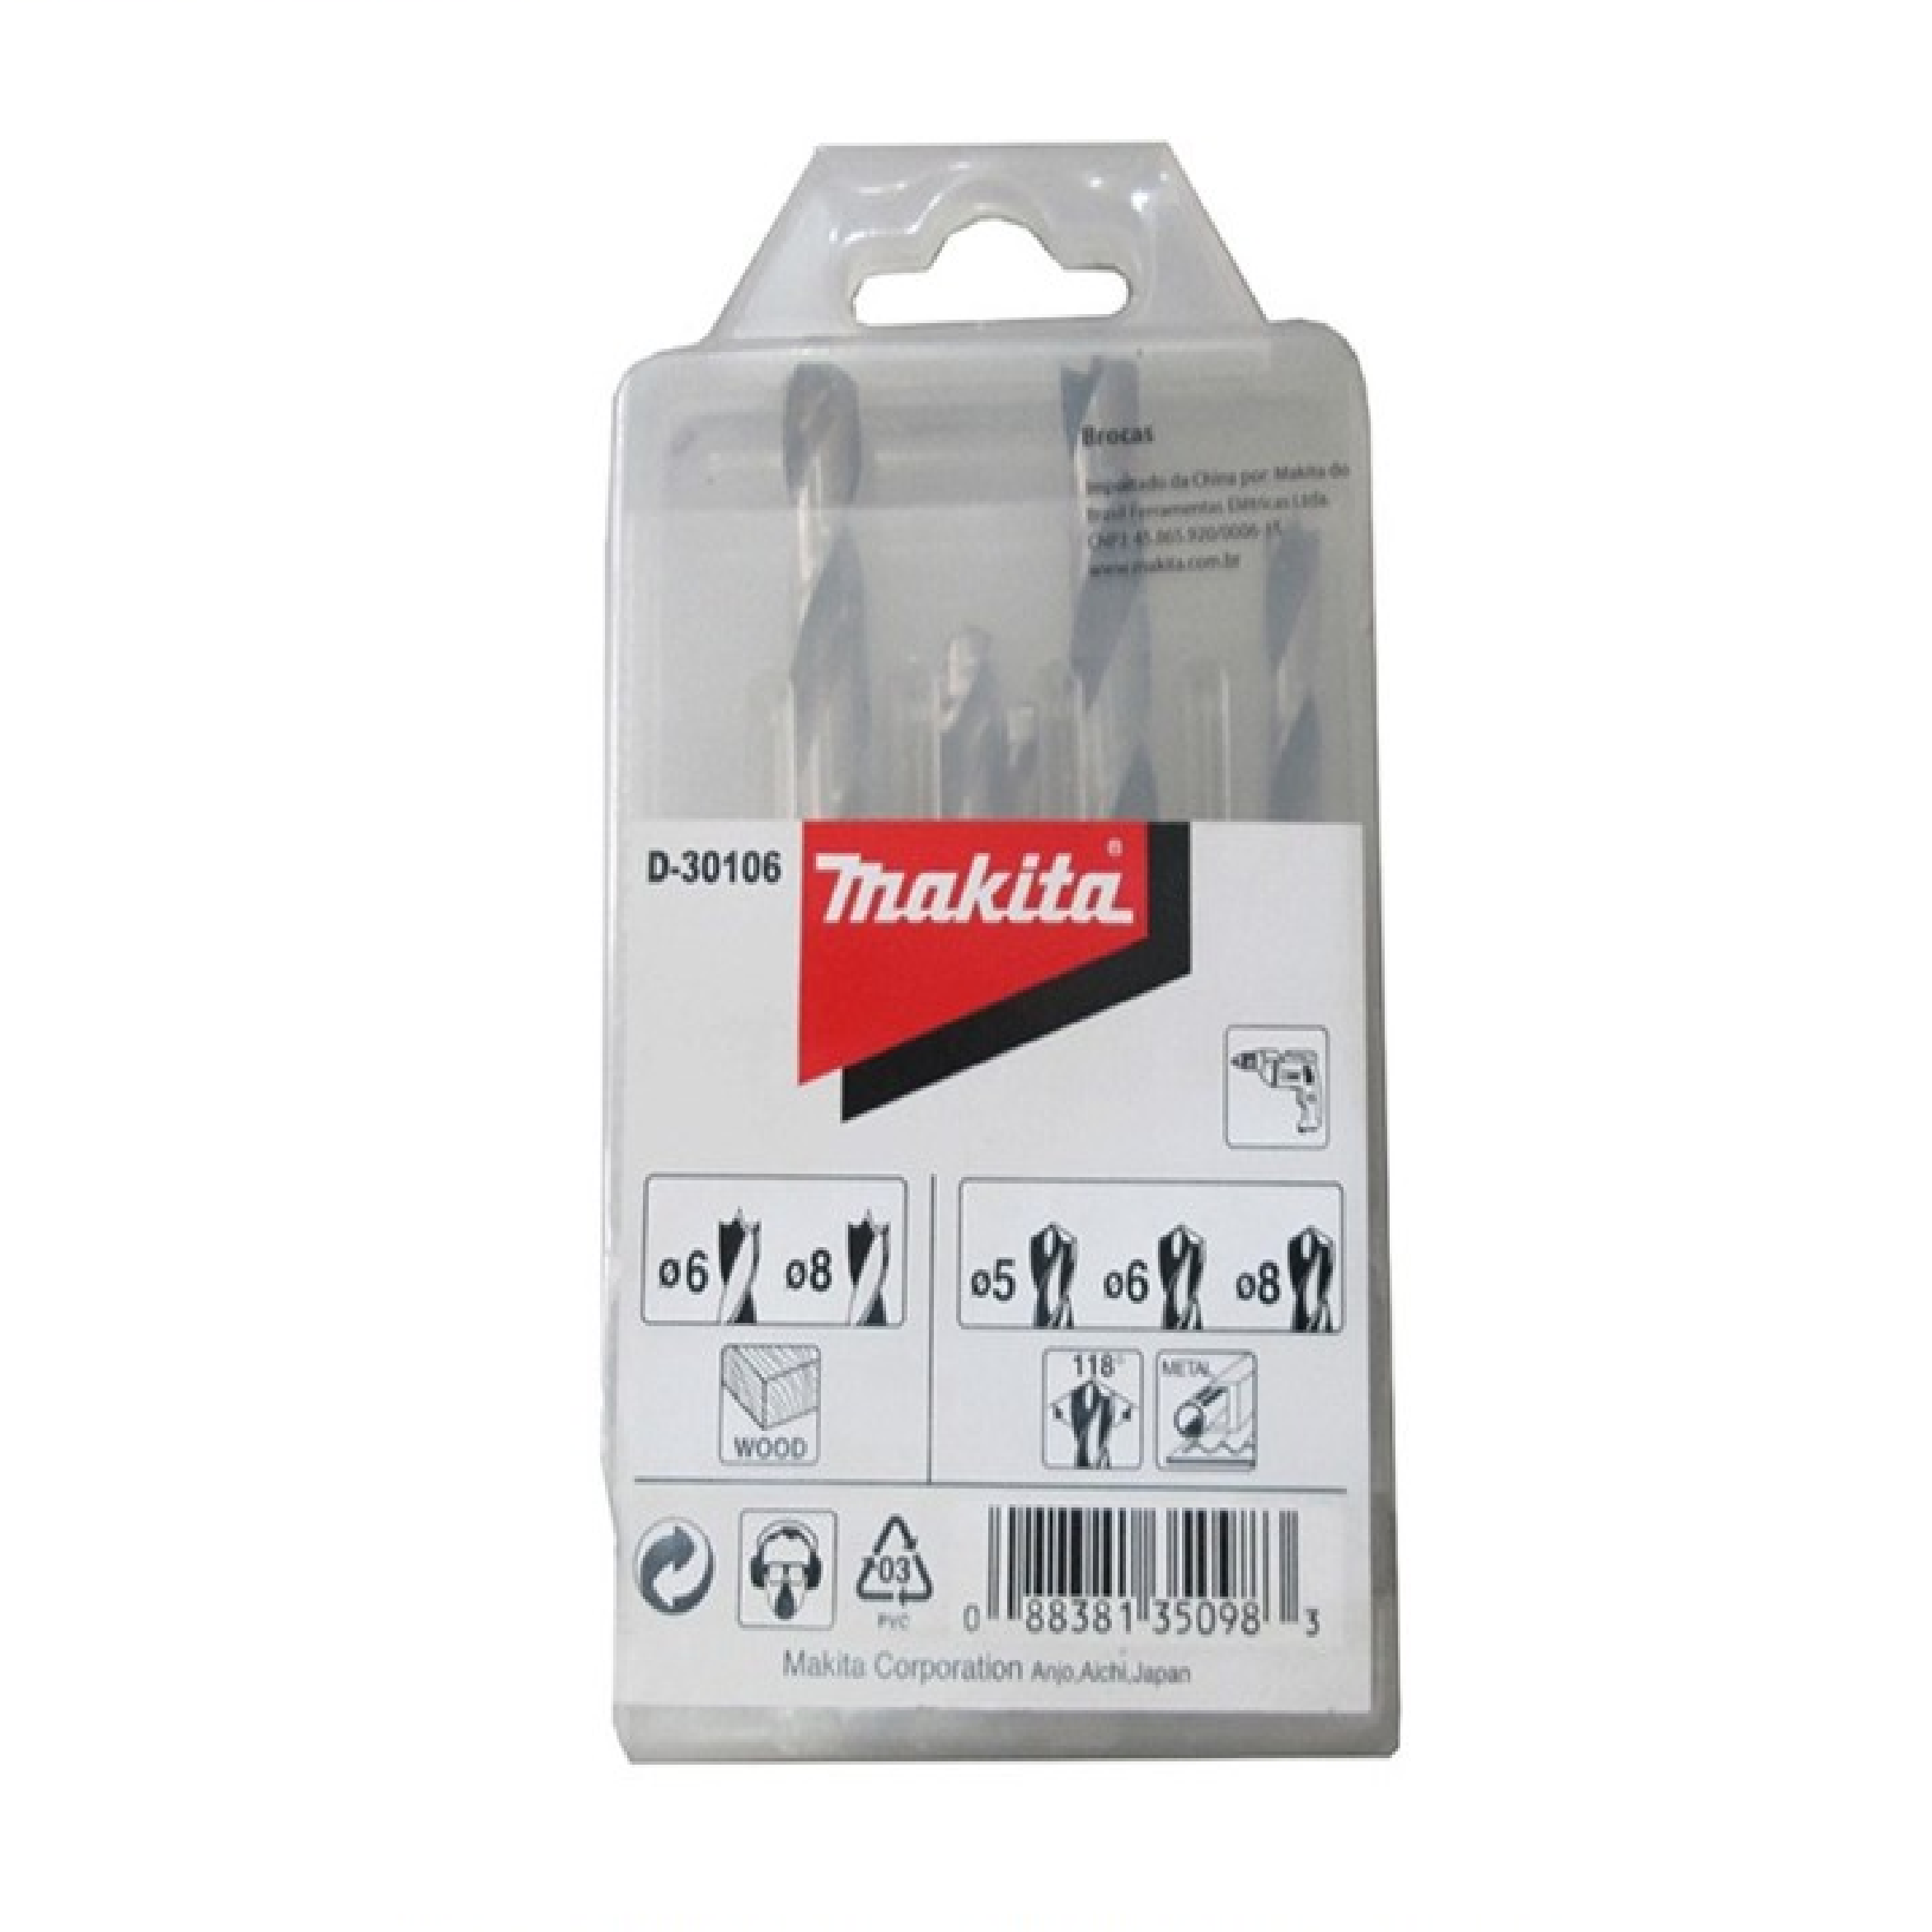 Makita D-30106 HSS Drill Bit Set For Wood And Metal 5PC/PACK